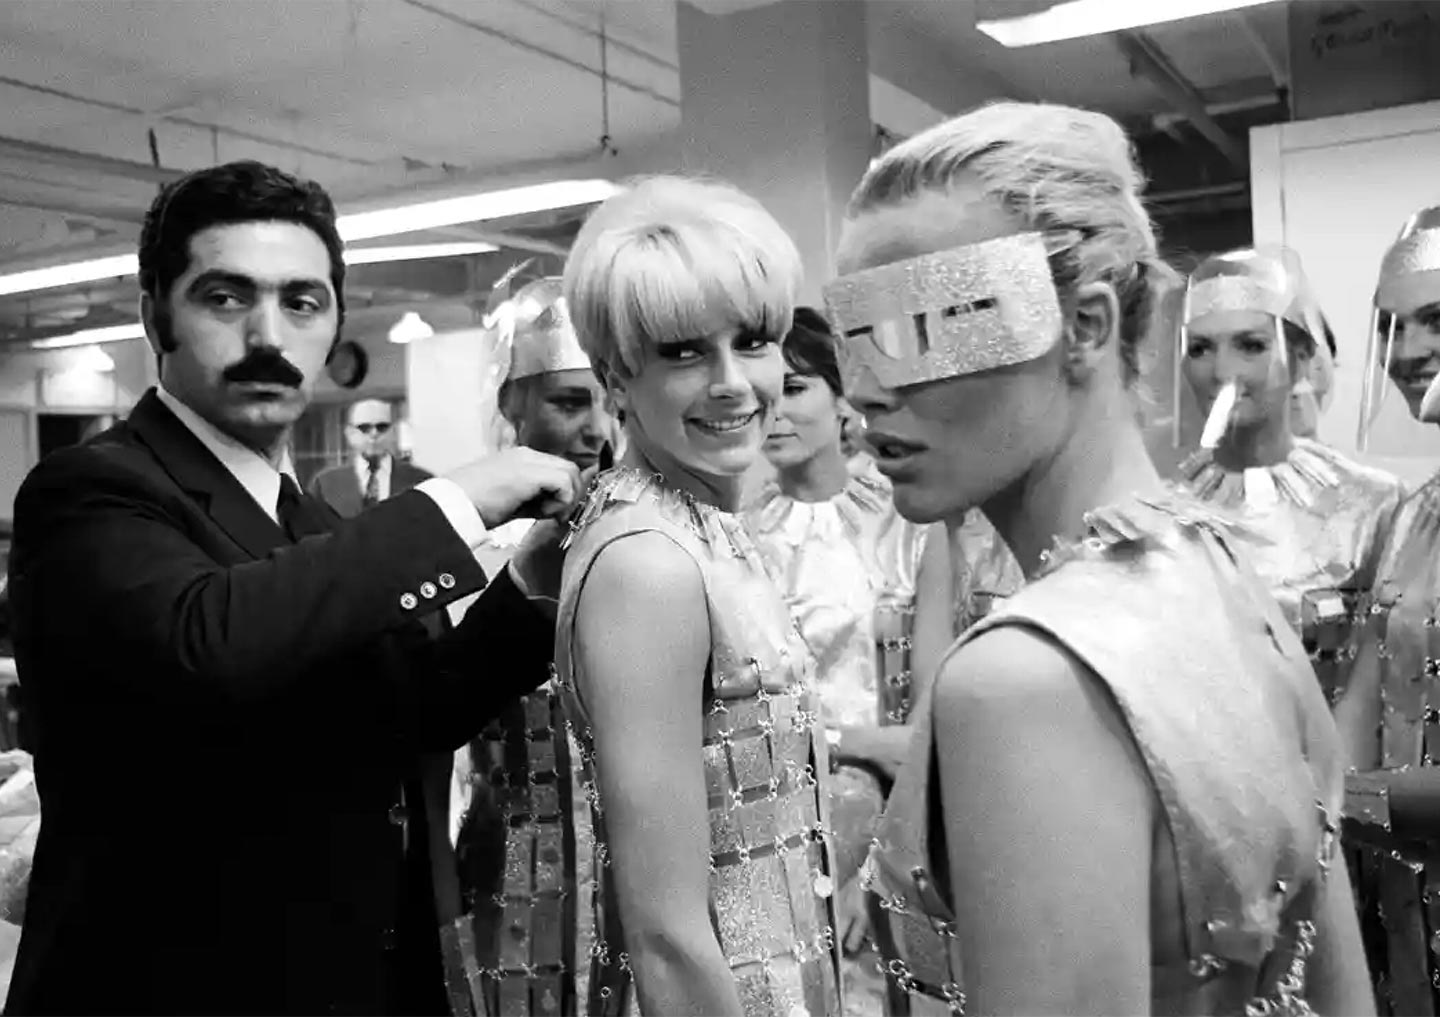 Paco Rabanne on the set of Casino Royale at Elstree Studios in 1966